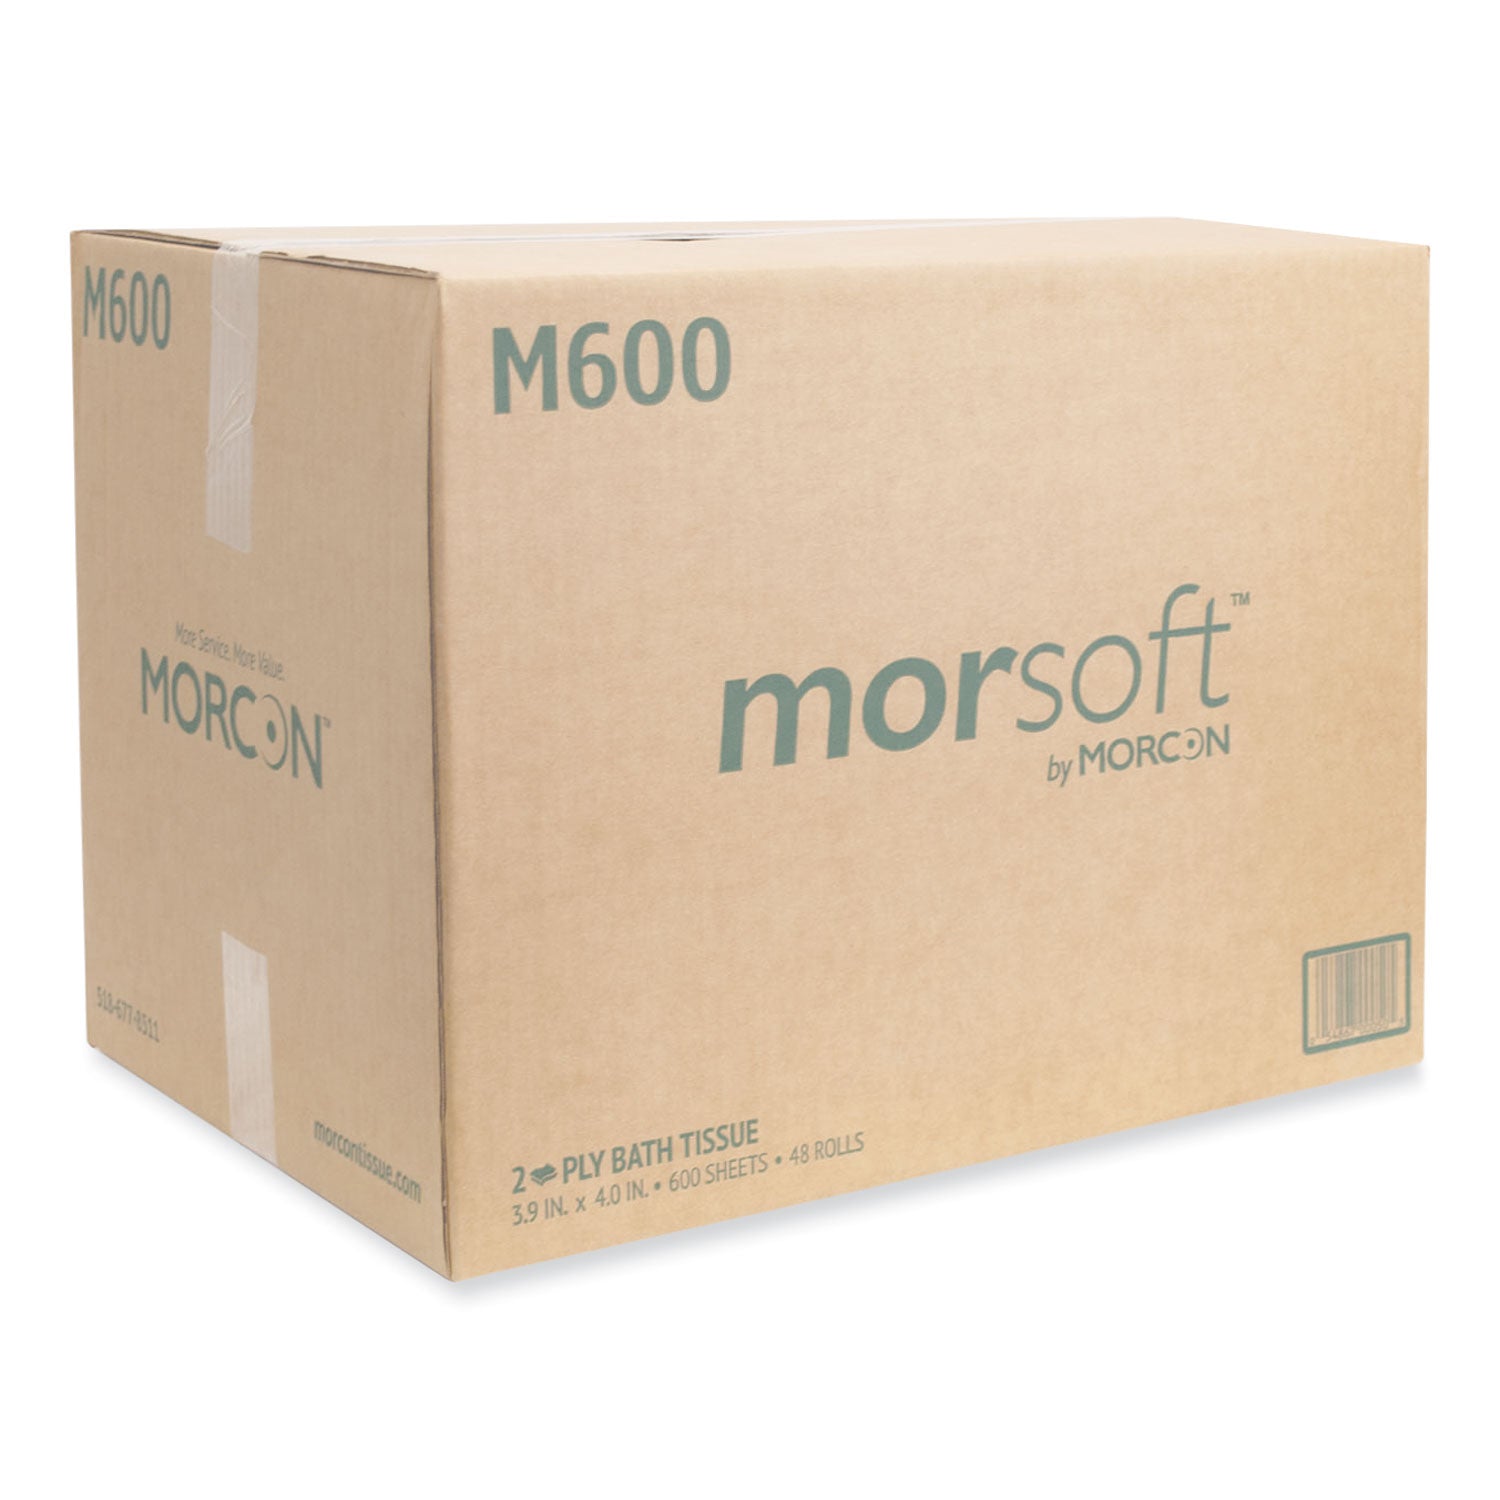 morsoft-controlled-bath-tissue-septic-safe-2-ply-white-600-sheets-roll-48-rolls-carton_morm600 - 2